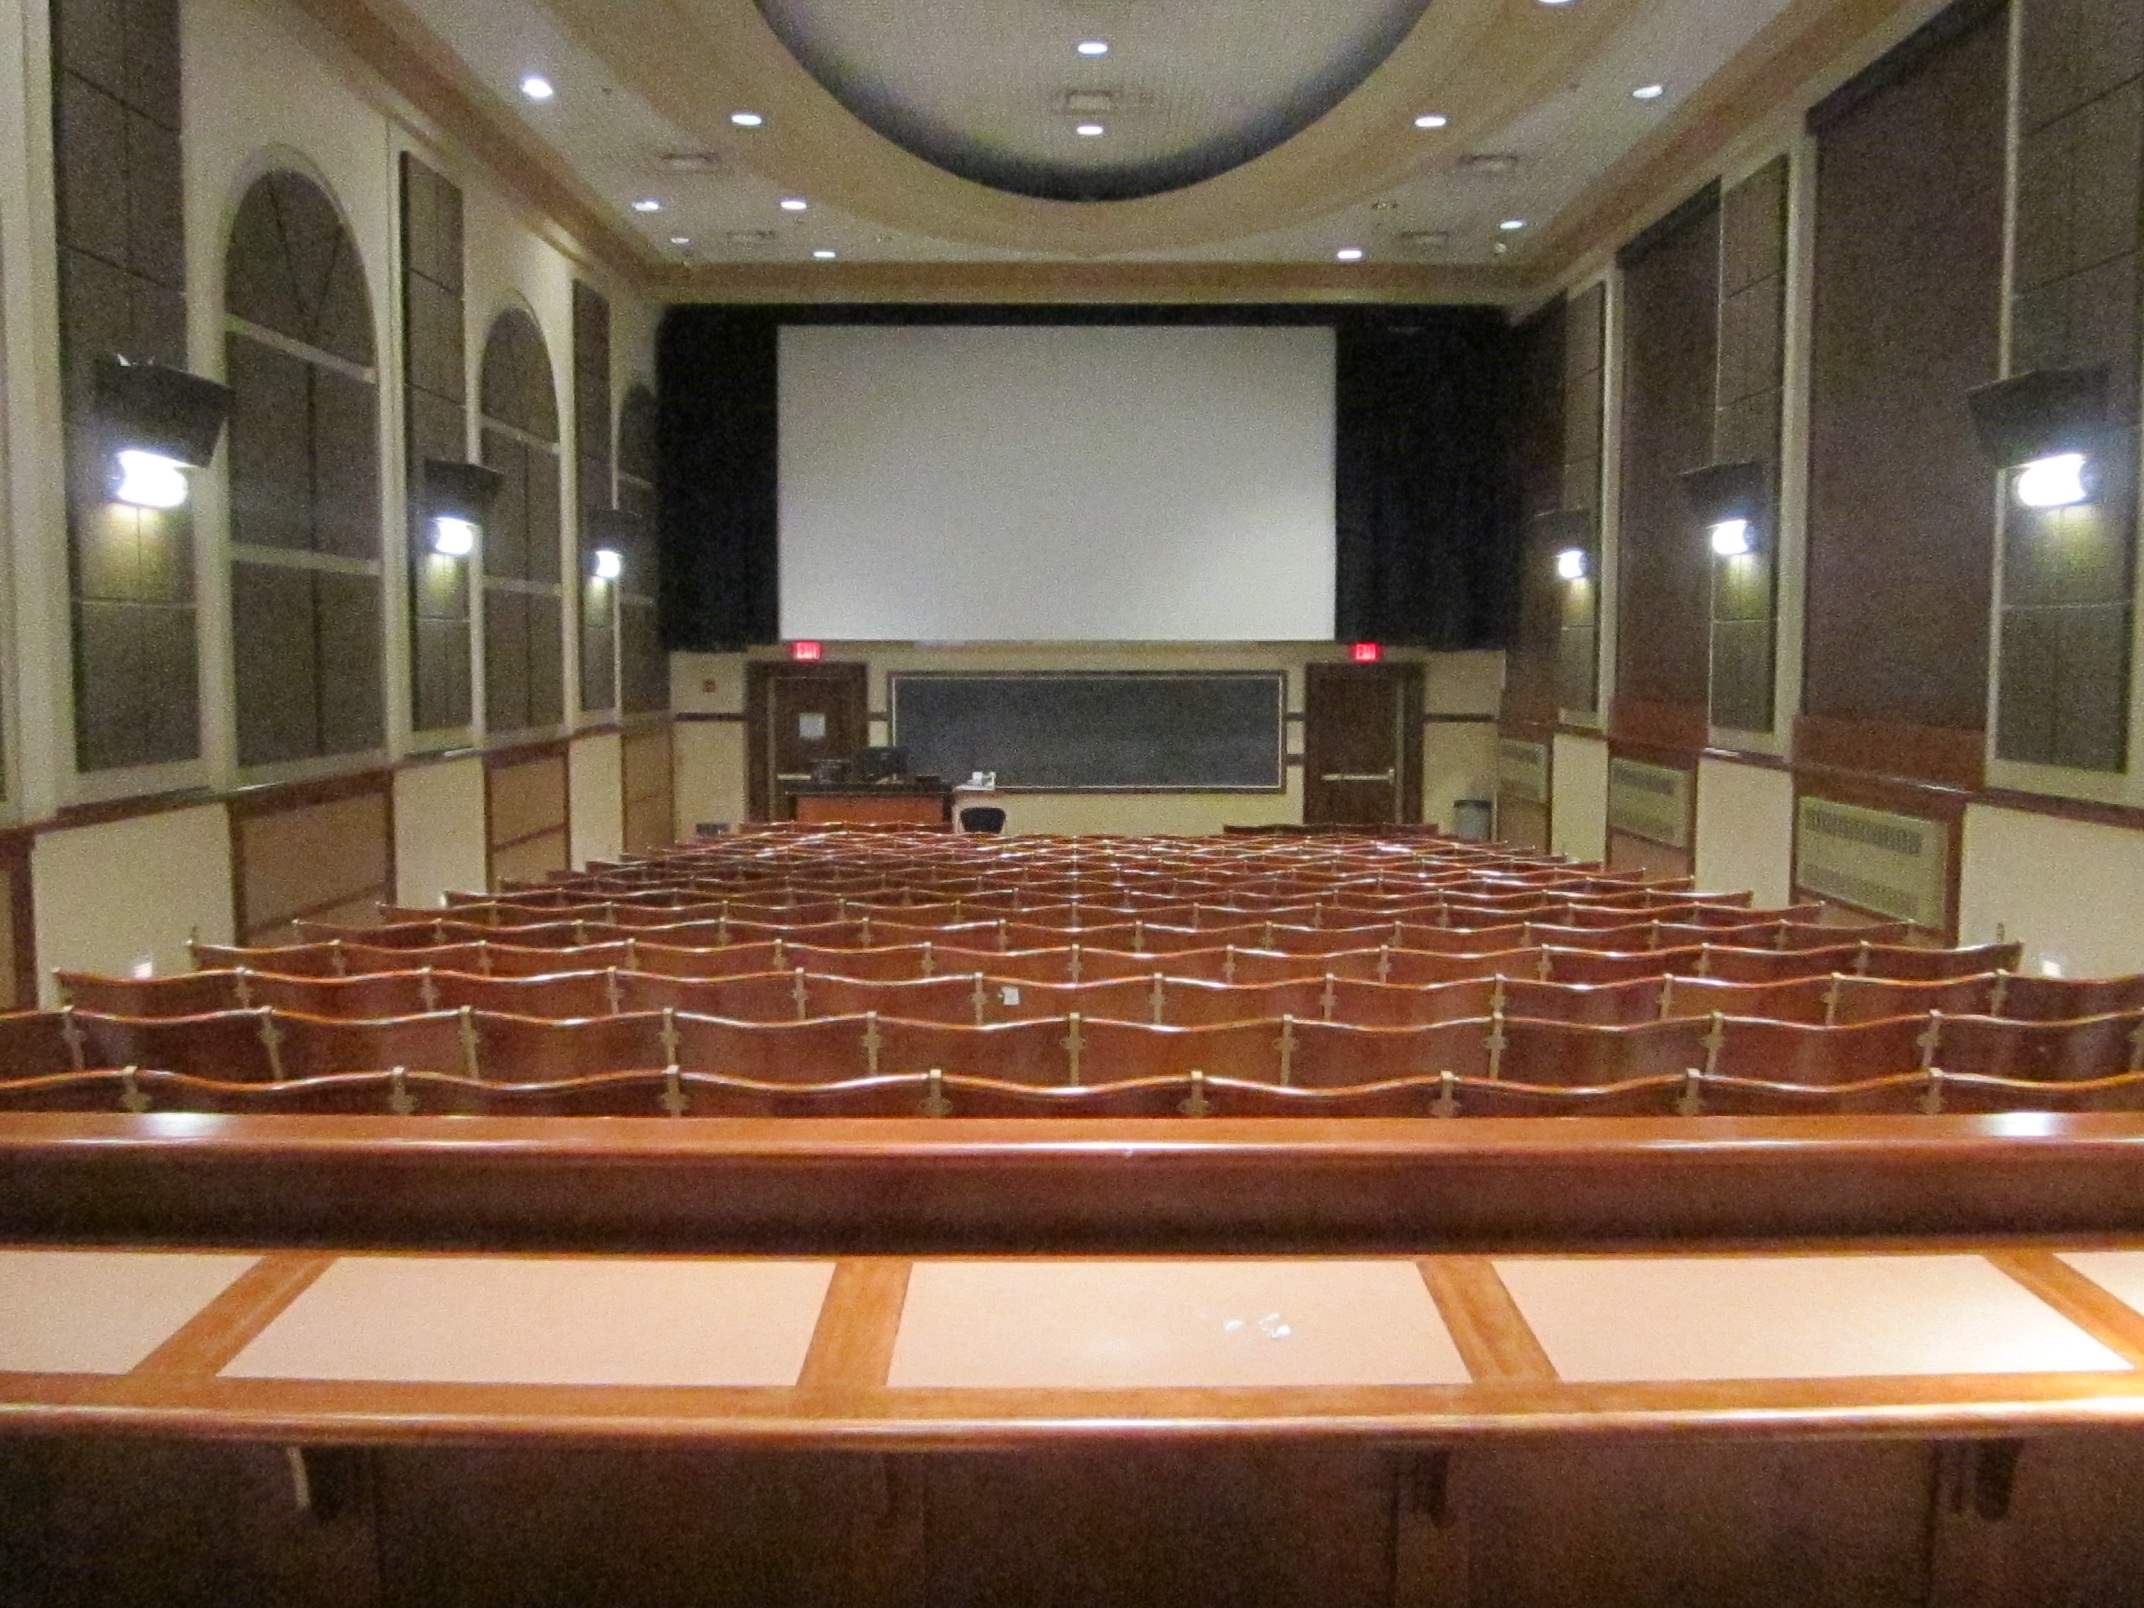 A view of the classroom with fixed auditorium seating, chalkboard, and projection screen in front.